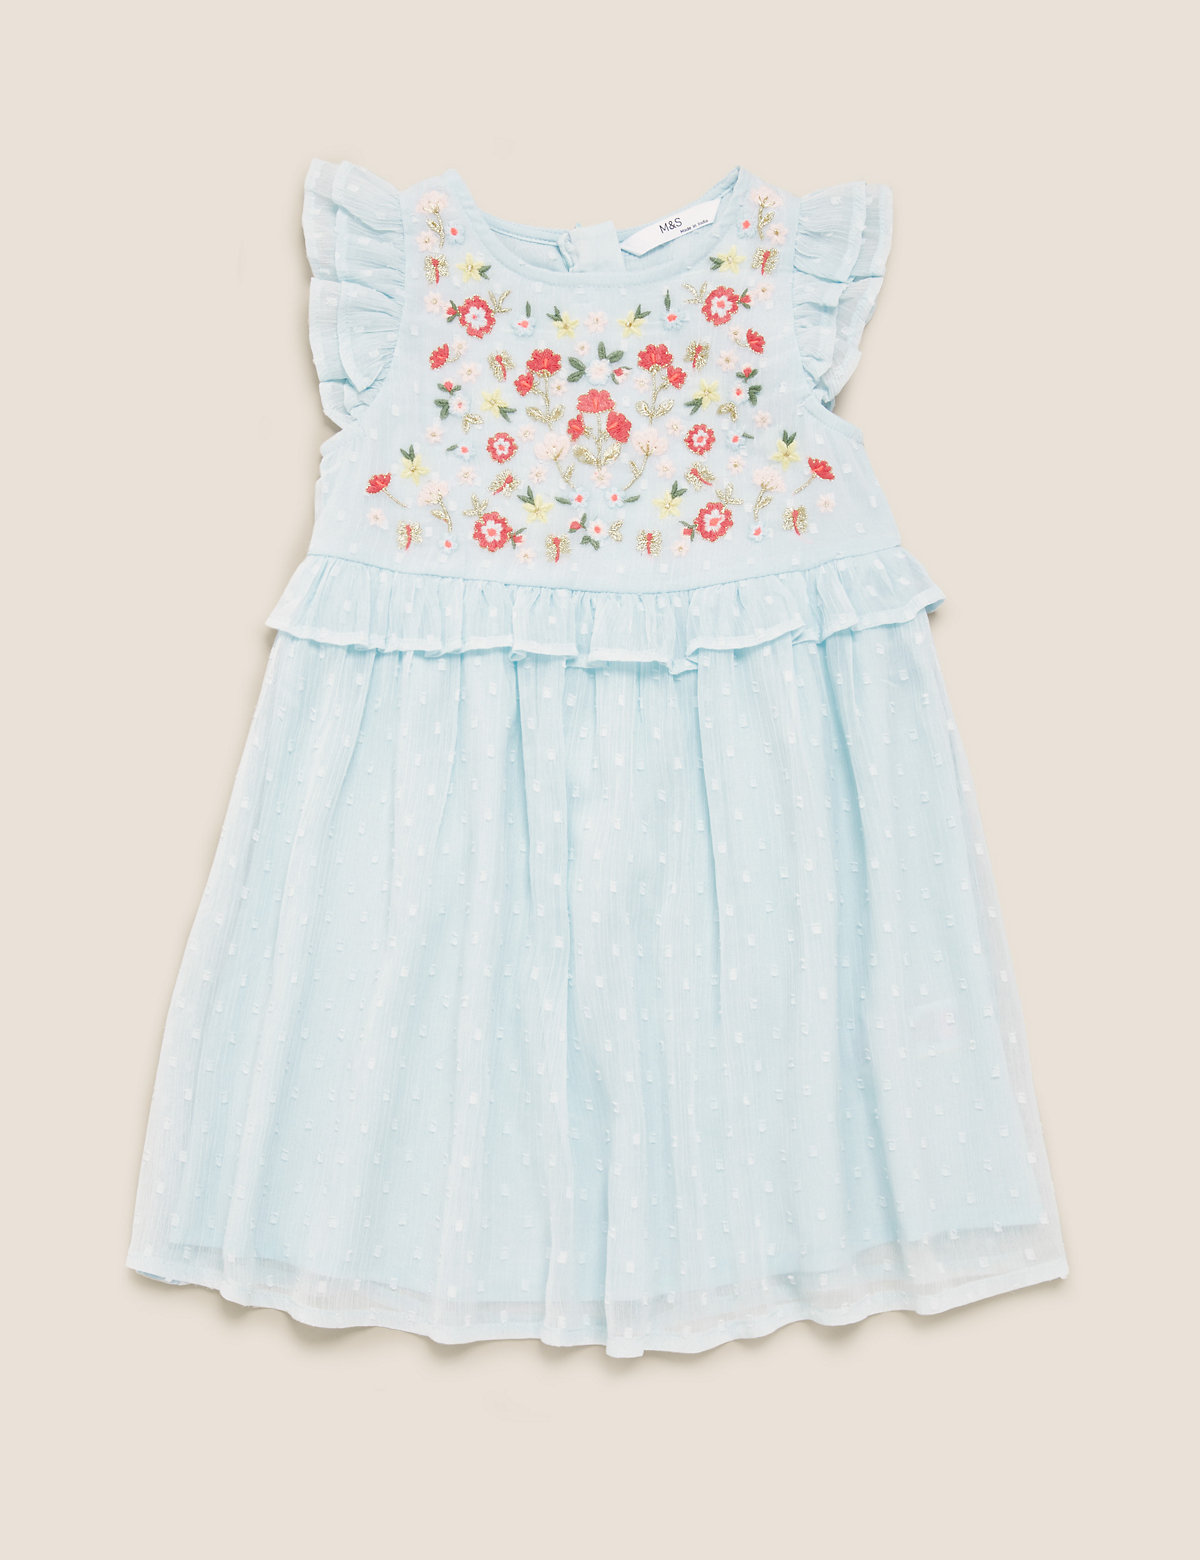 Embroidered Floral Chiffon Dress (2-7 Yrs)